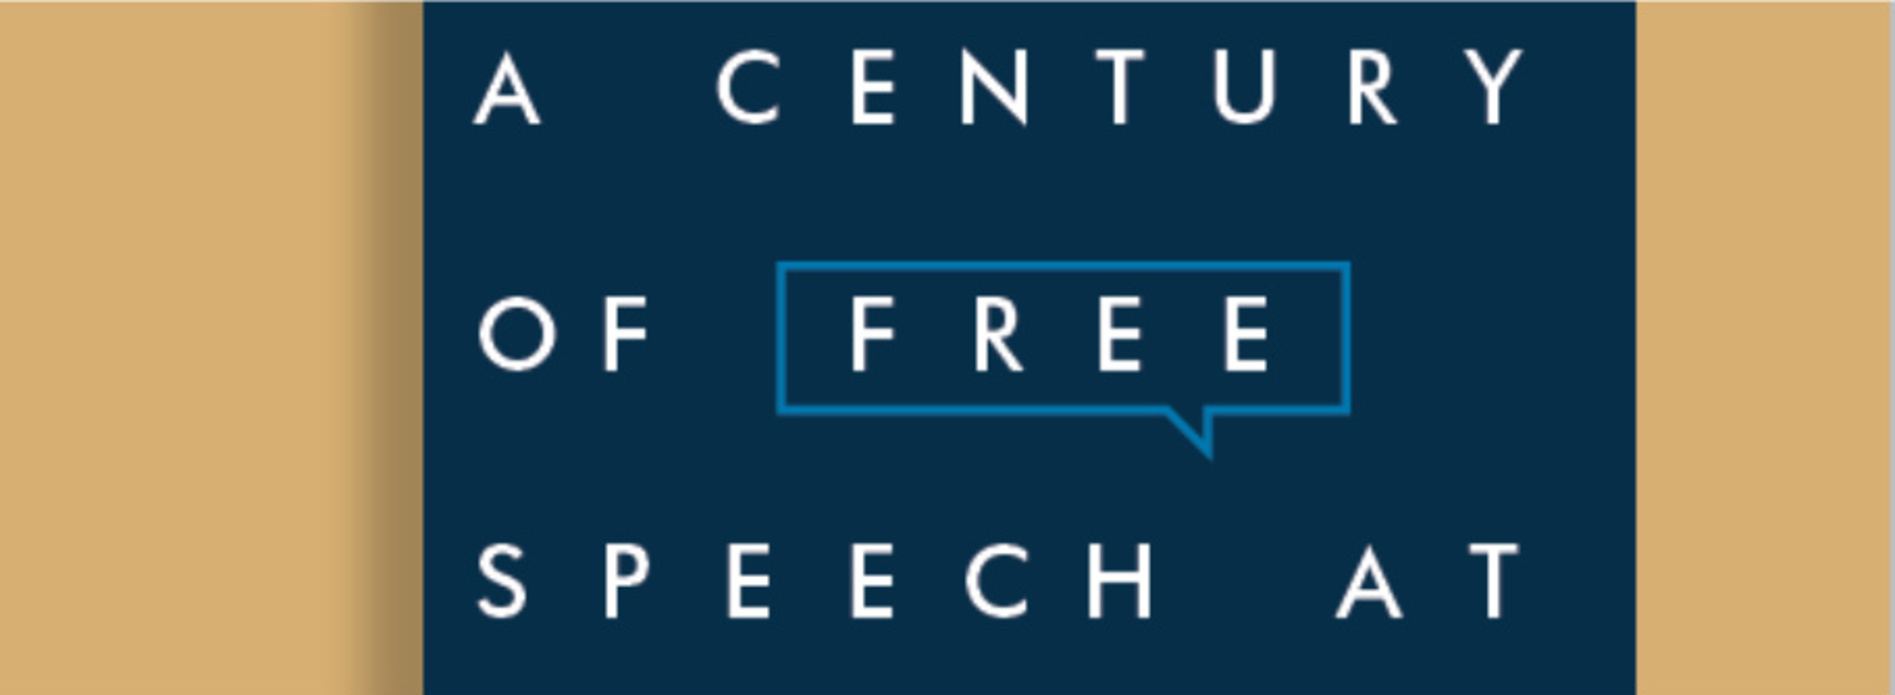 The Next Best Thing: Savoring A Century of Free Speech at the City Club of Cleveland